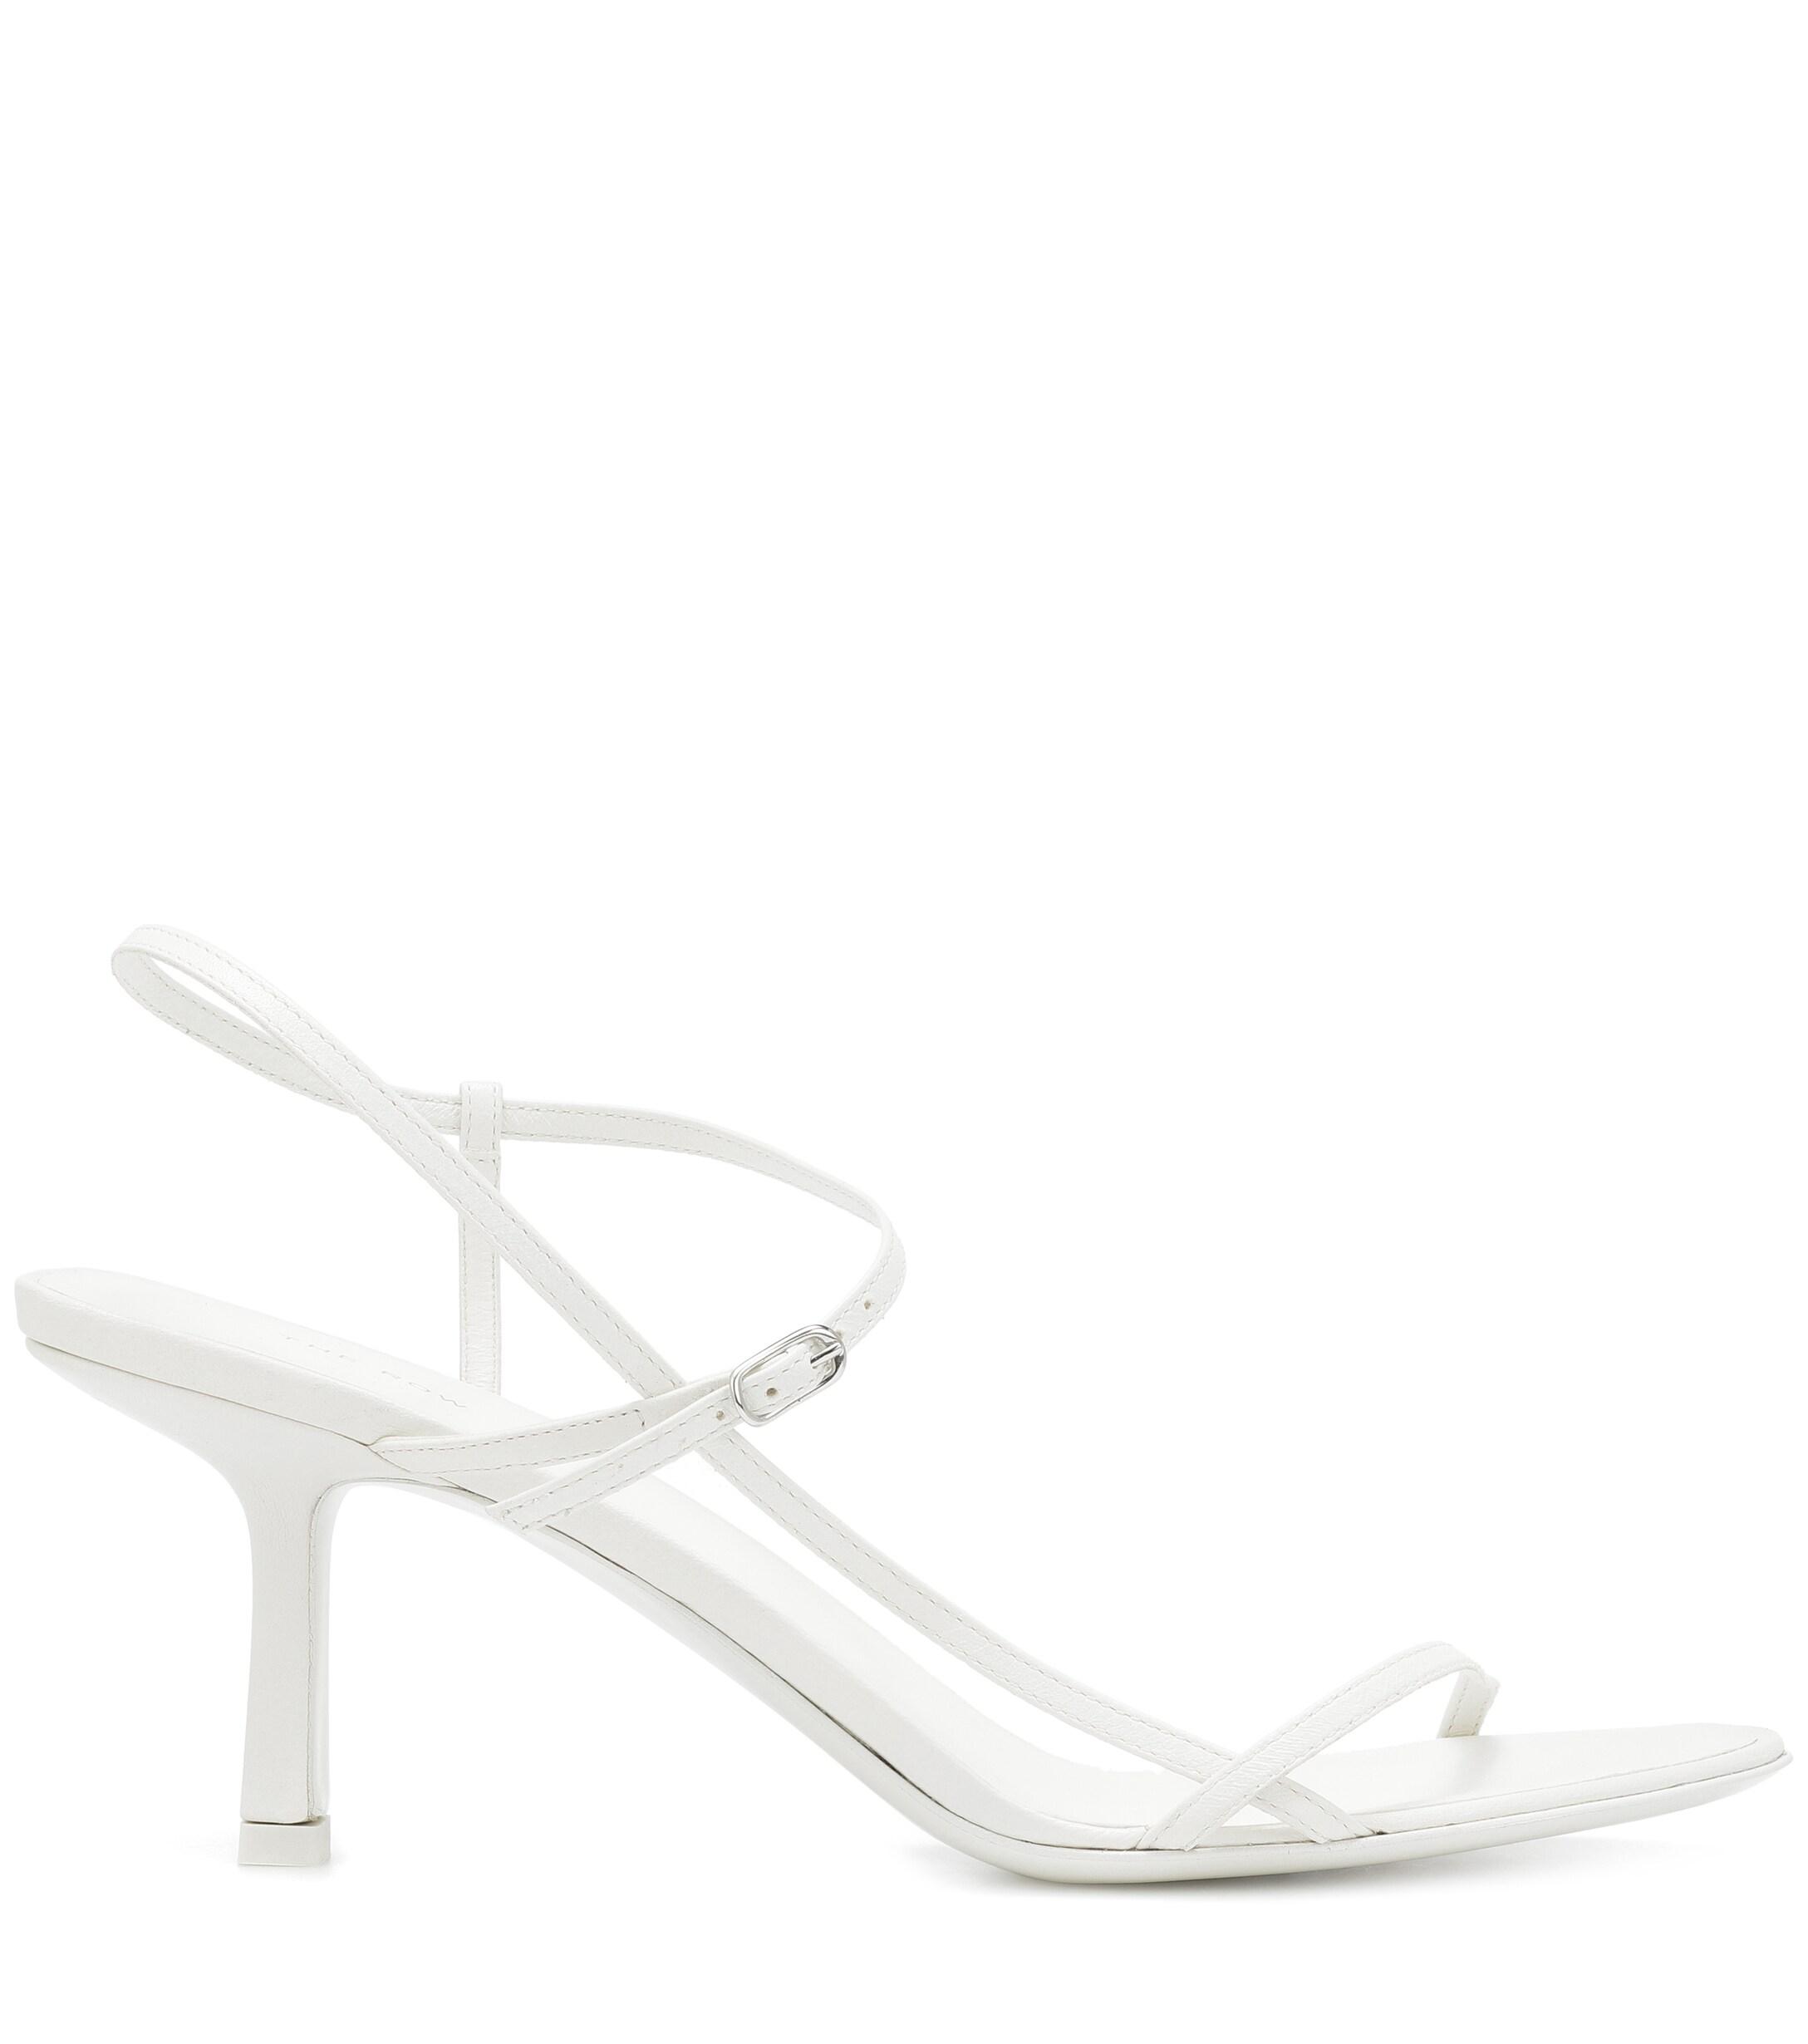 The Row Bare Leather Sandals in Bright White (White) - Lyst